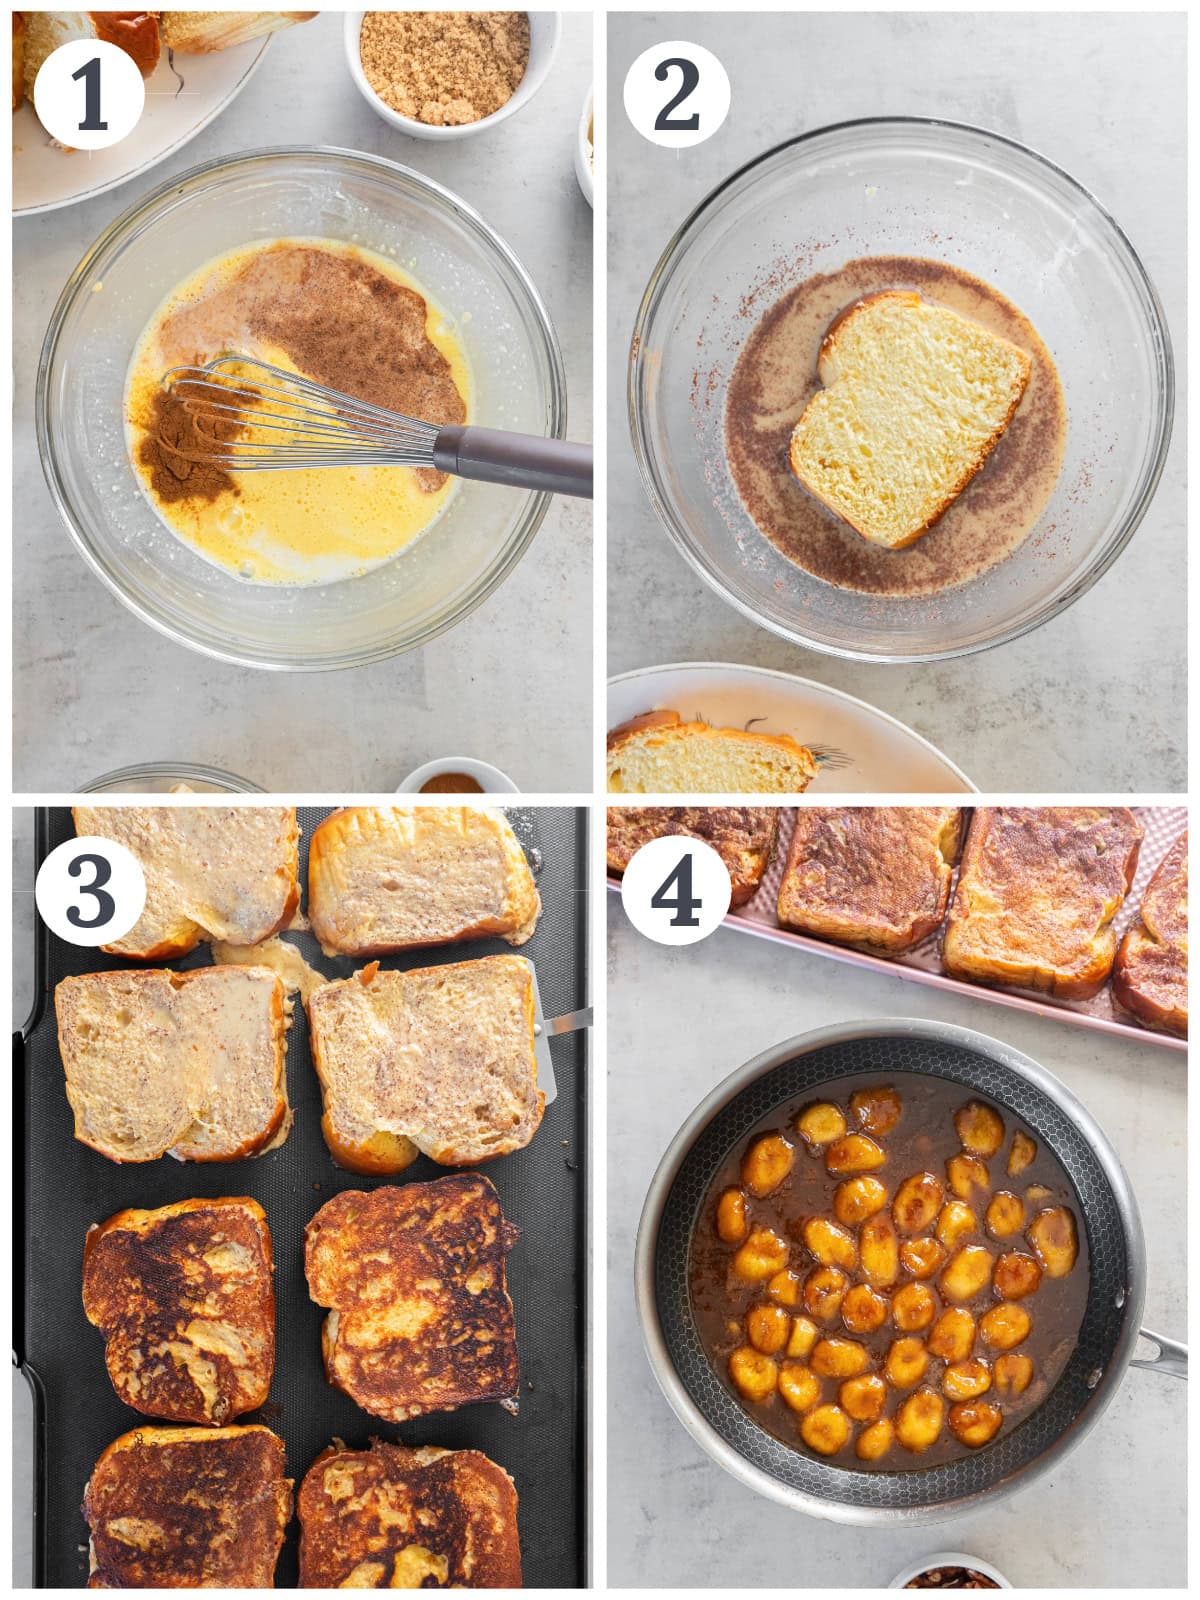 photo collage demonstrating how to make french toast in a mixing bowl and griddle and how to make bananas foster topping in a skillet.